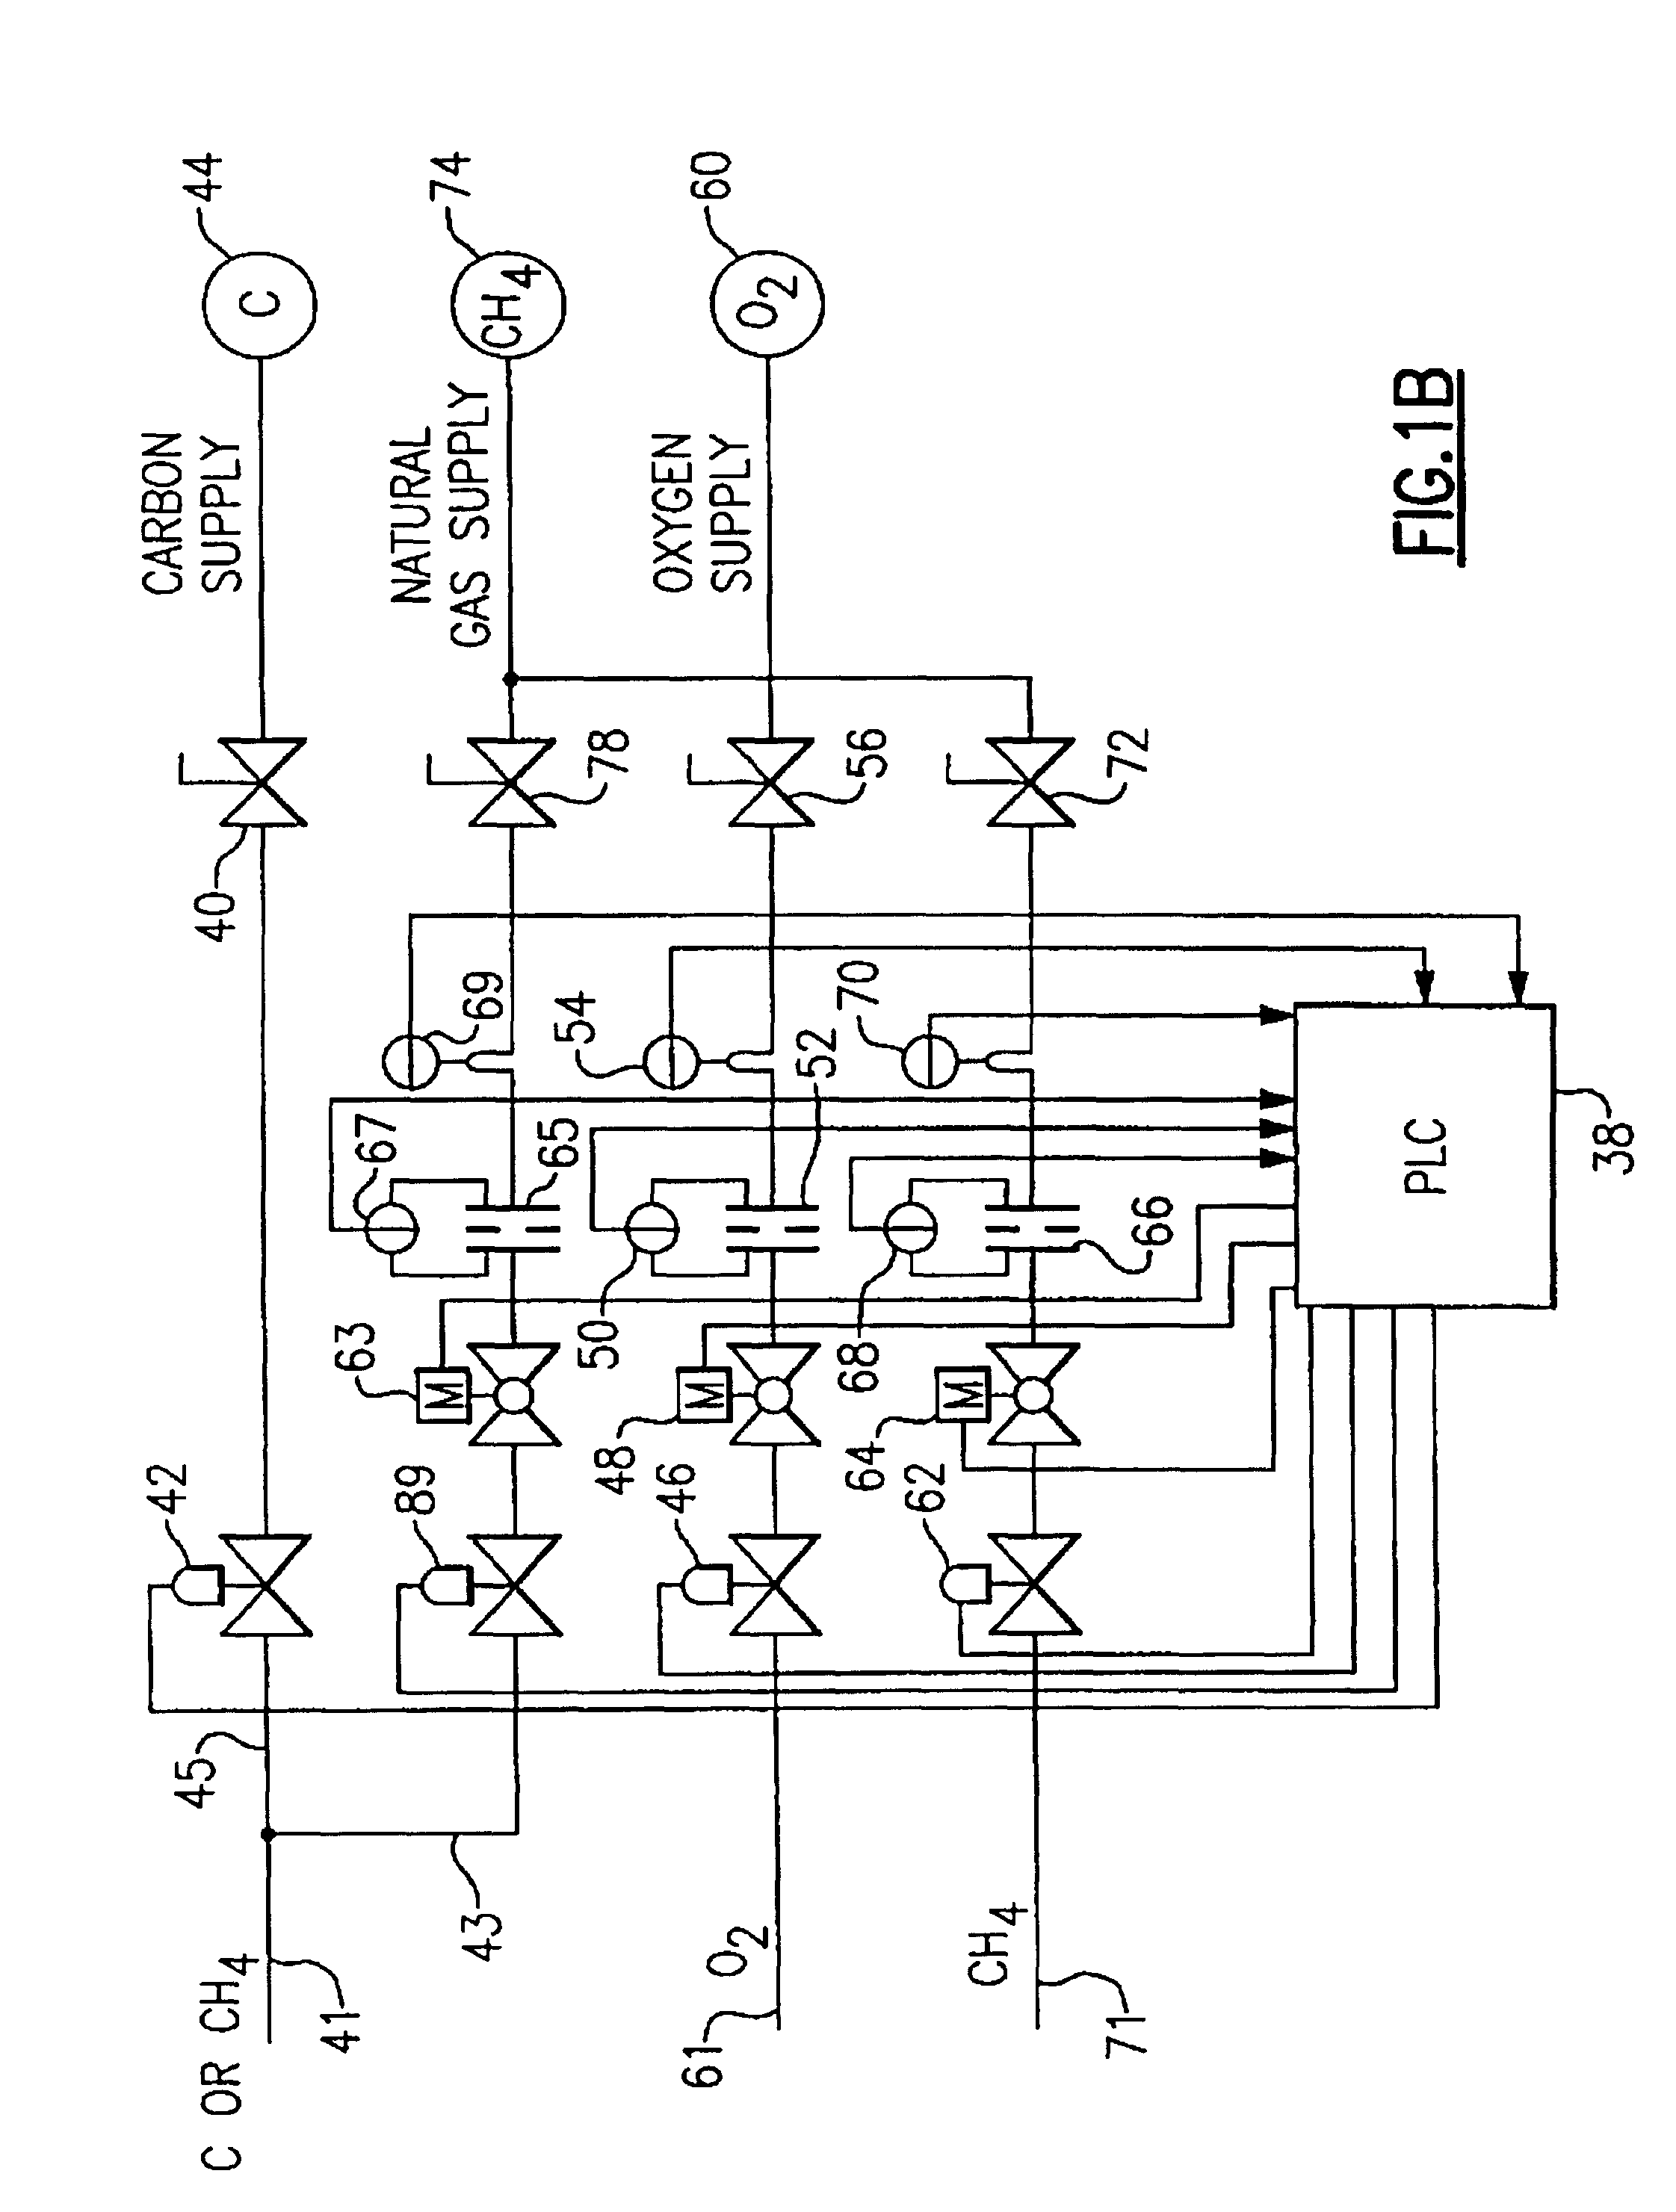 Method and apparatus for improved EAF steelmaking